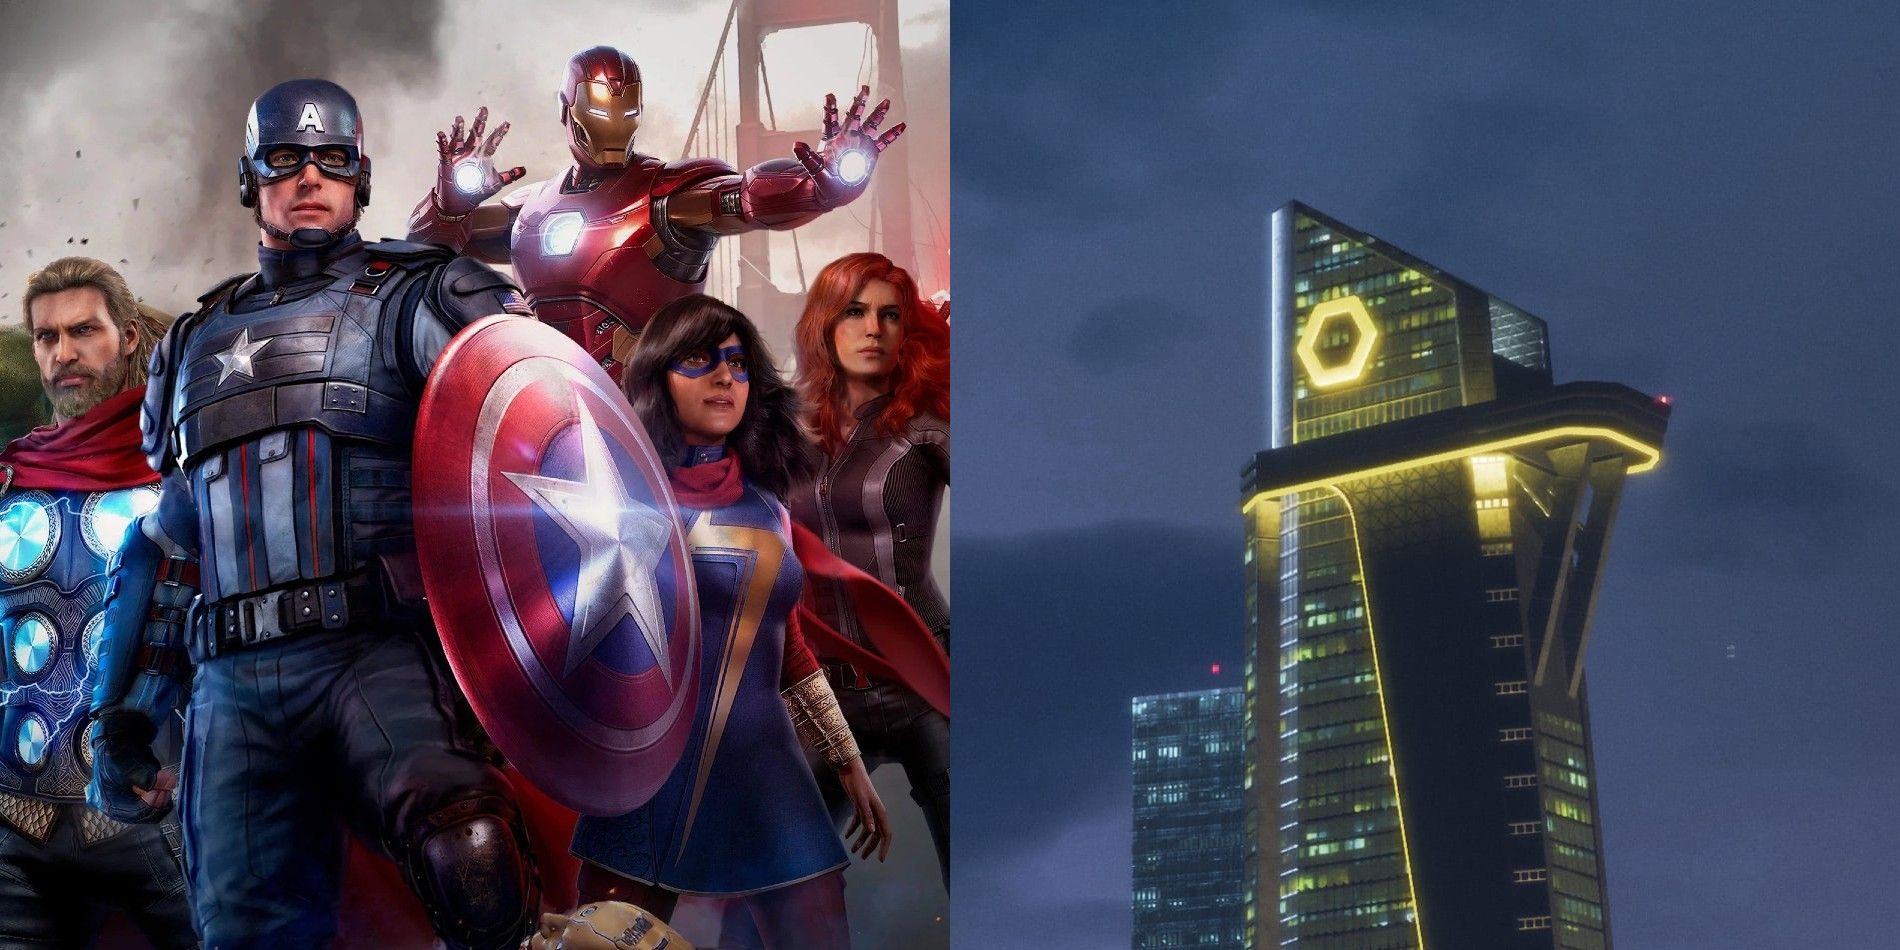 Marvel's Avengers' cast with the Avengers Tower in-game.